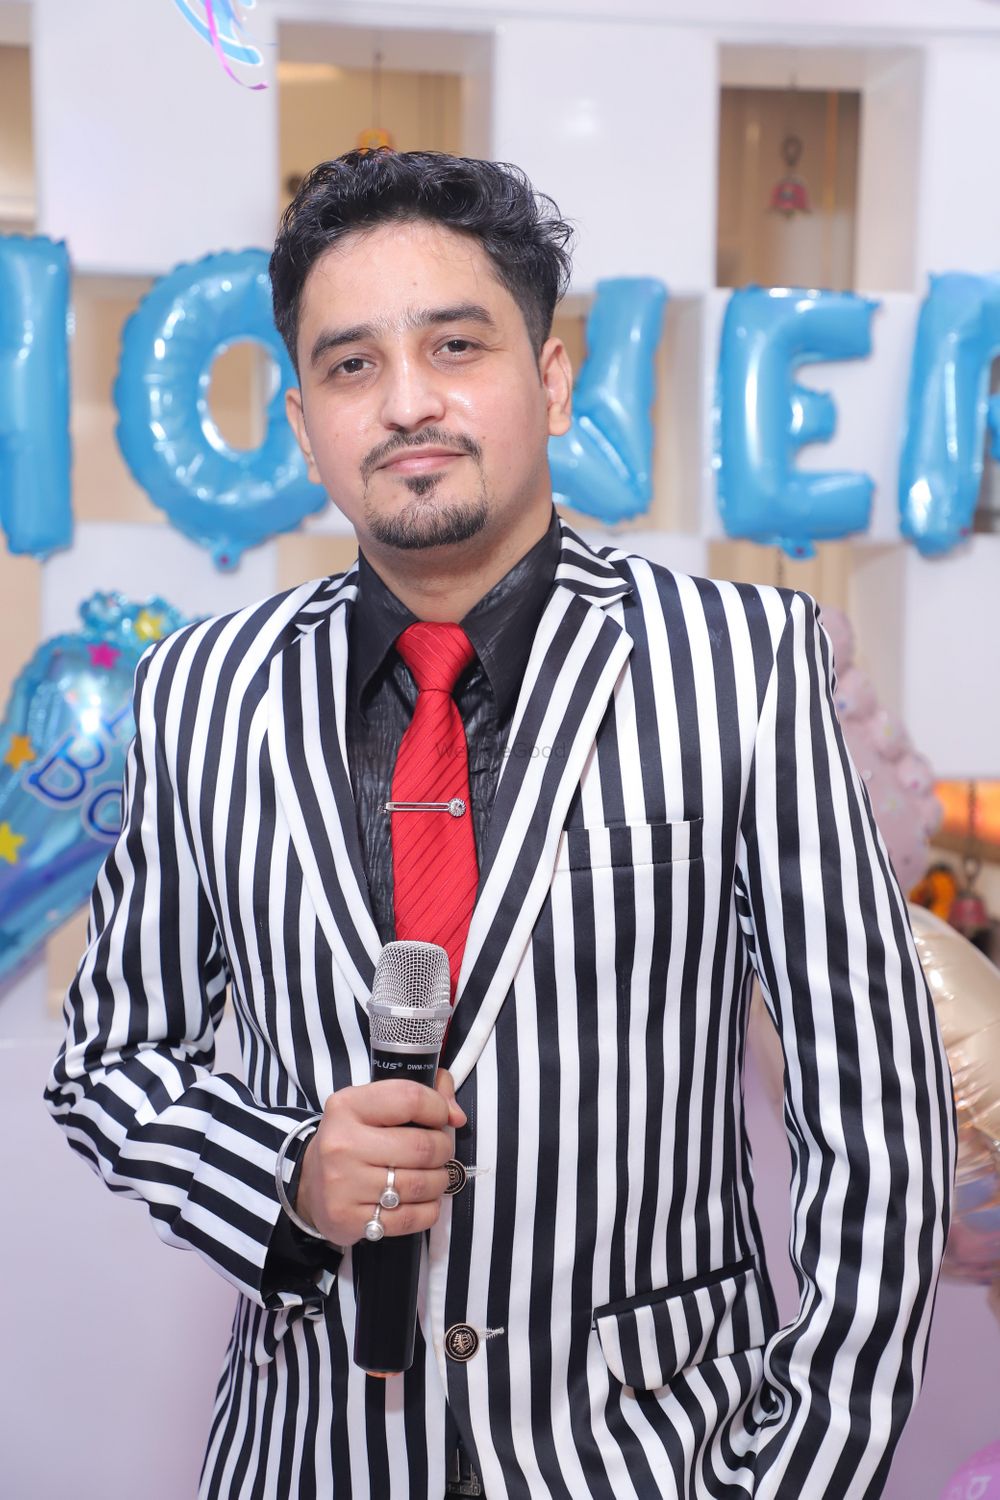 Photo From Baby Shower Event - By Lakshya Khanna